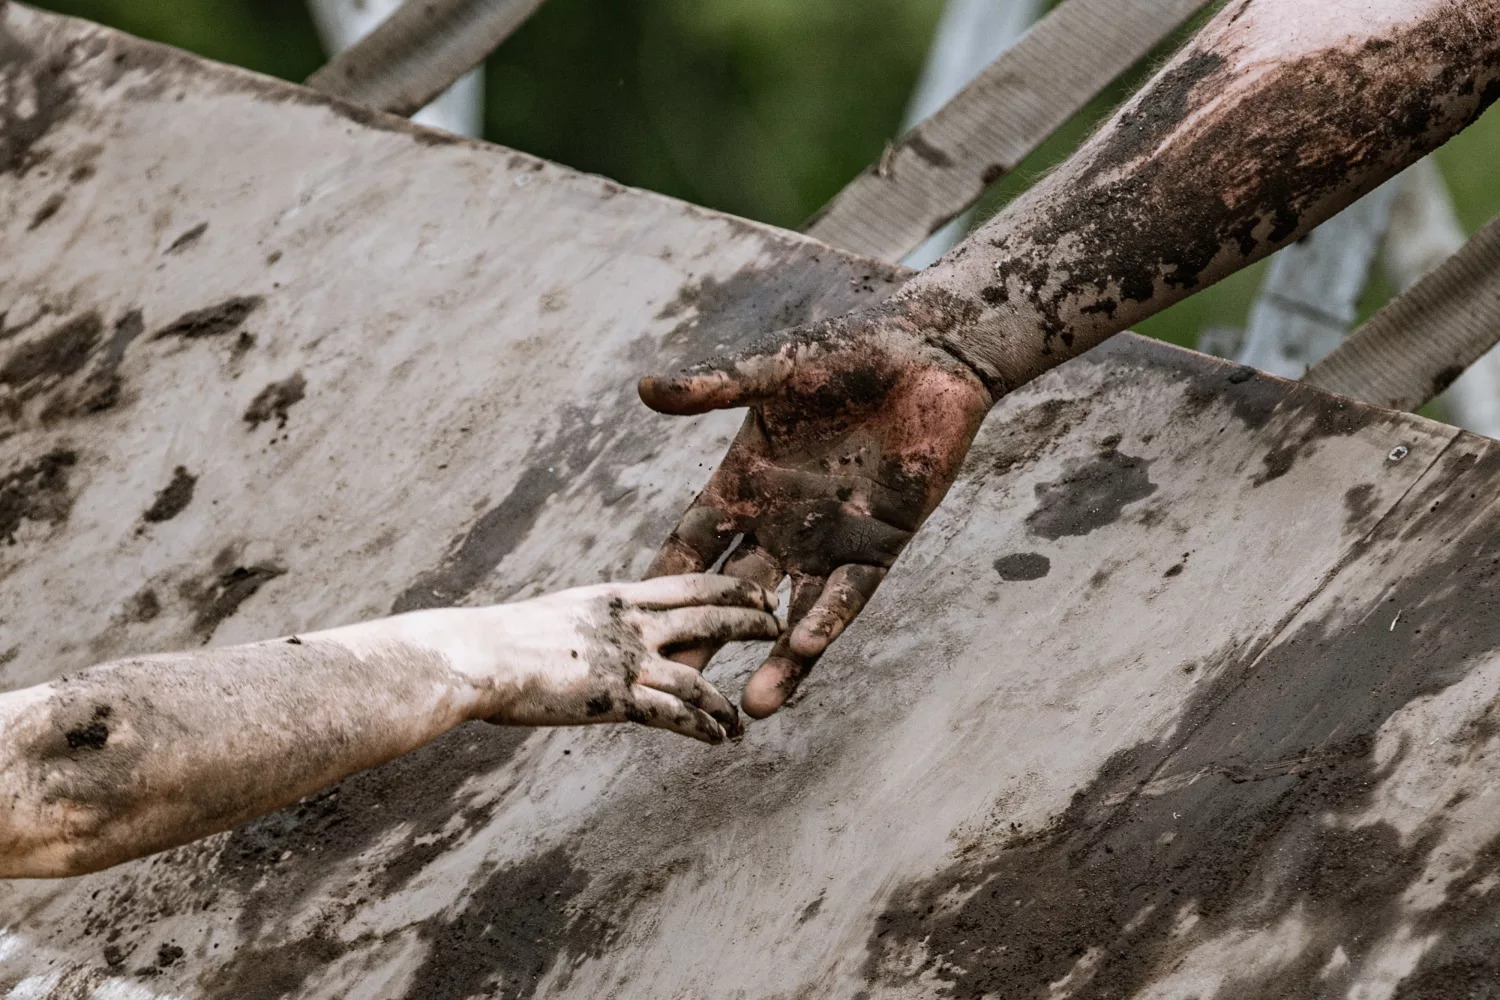 Muddy hands reaching towards each other to pull up an obstacle